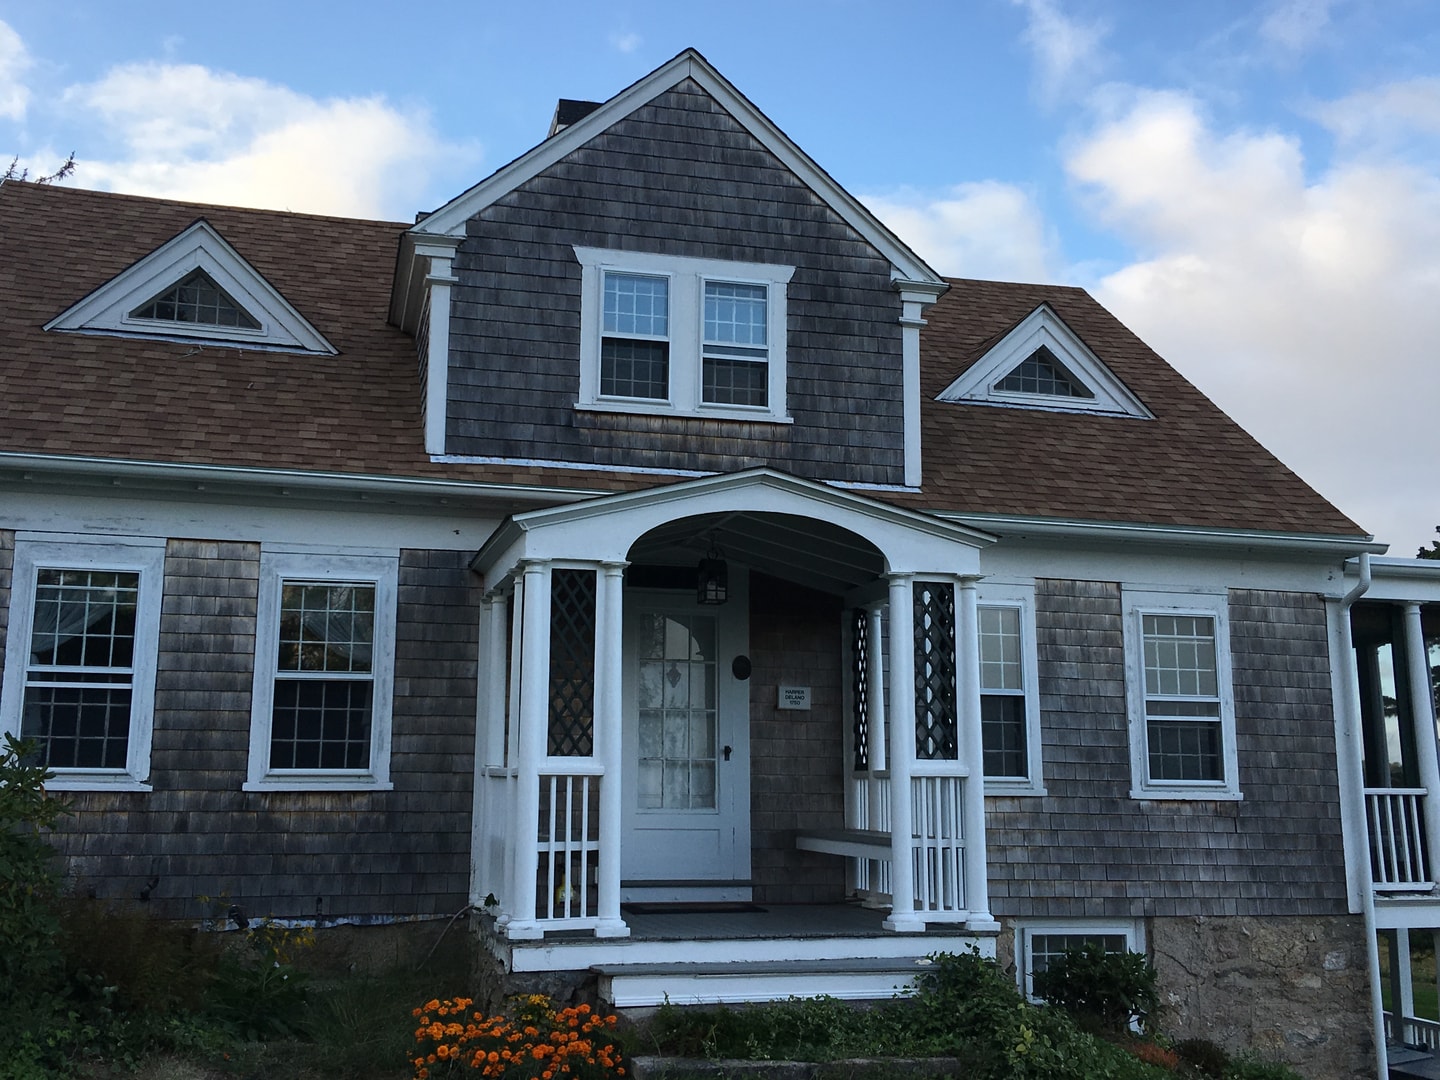 Deice your Roof & Gutters | New England Gutter Company